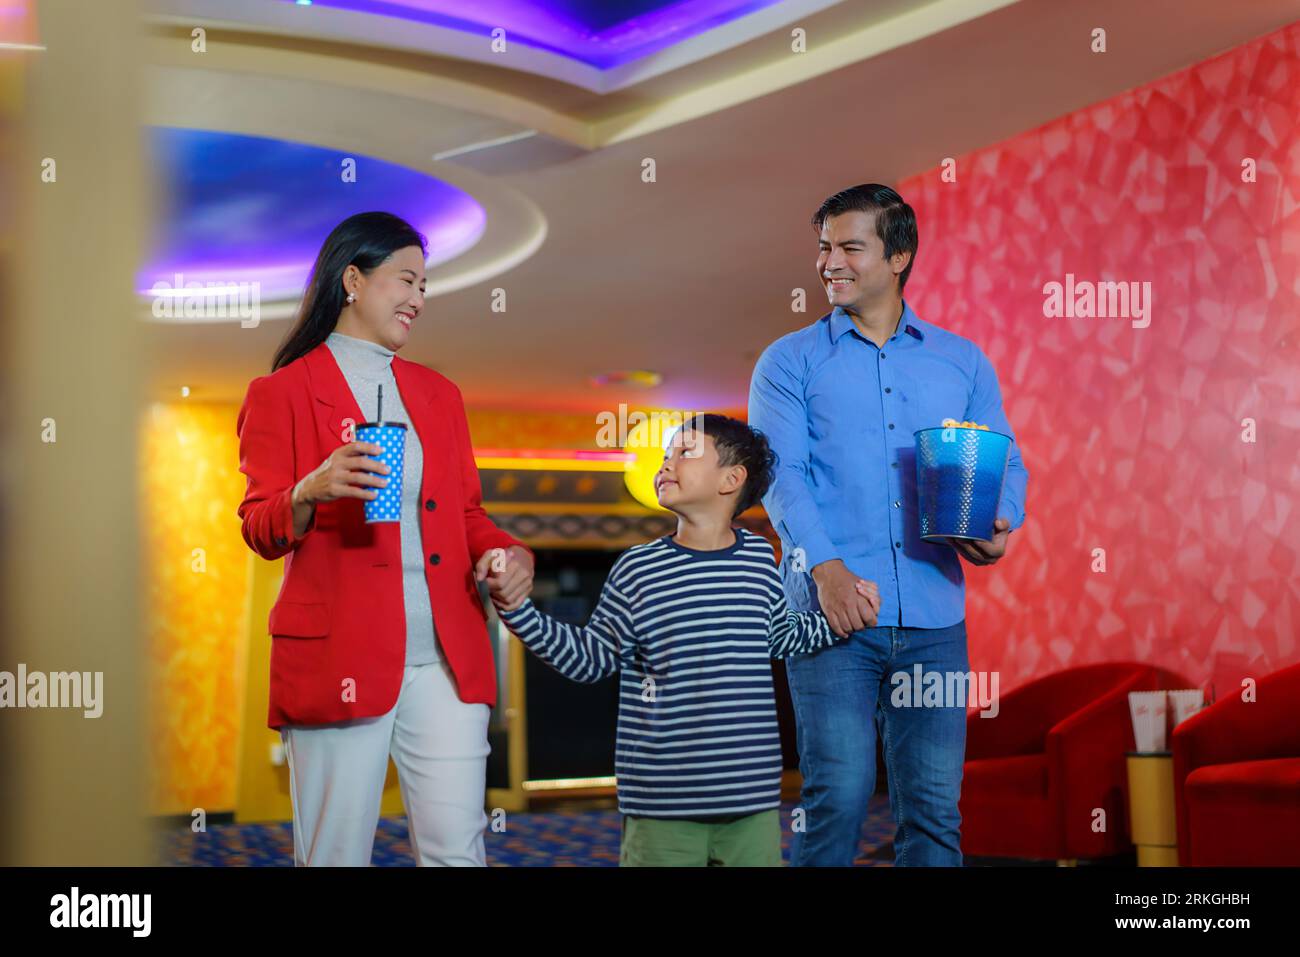 A cheerful family, parents and son hand in hand, enters the cinema with drinks and popcorn, ready to enjoy a heartwarming movie experience together. Stock Photo